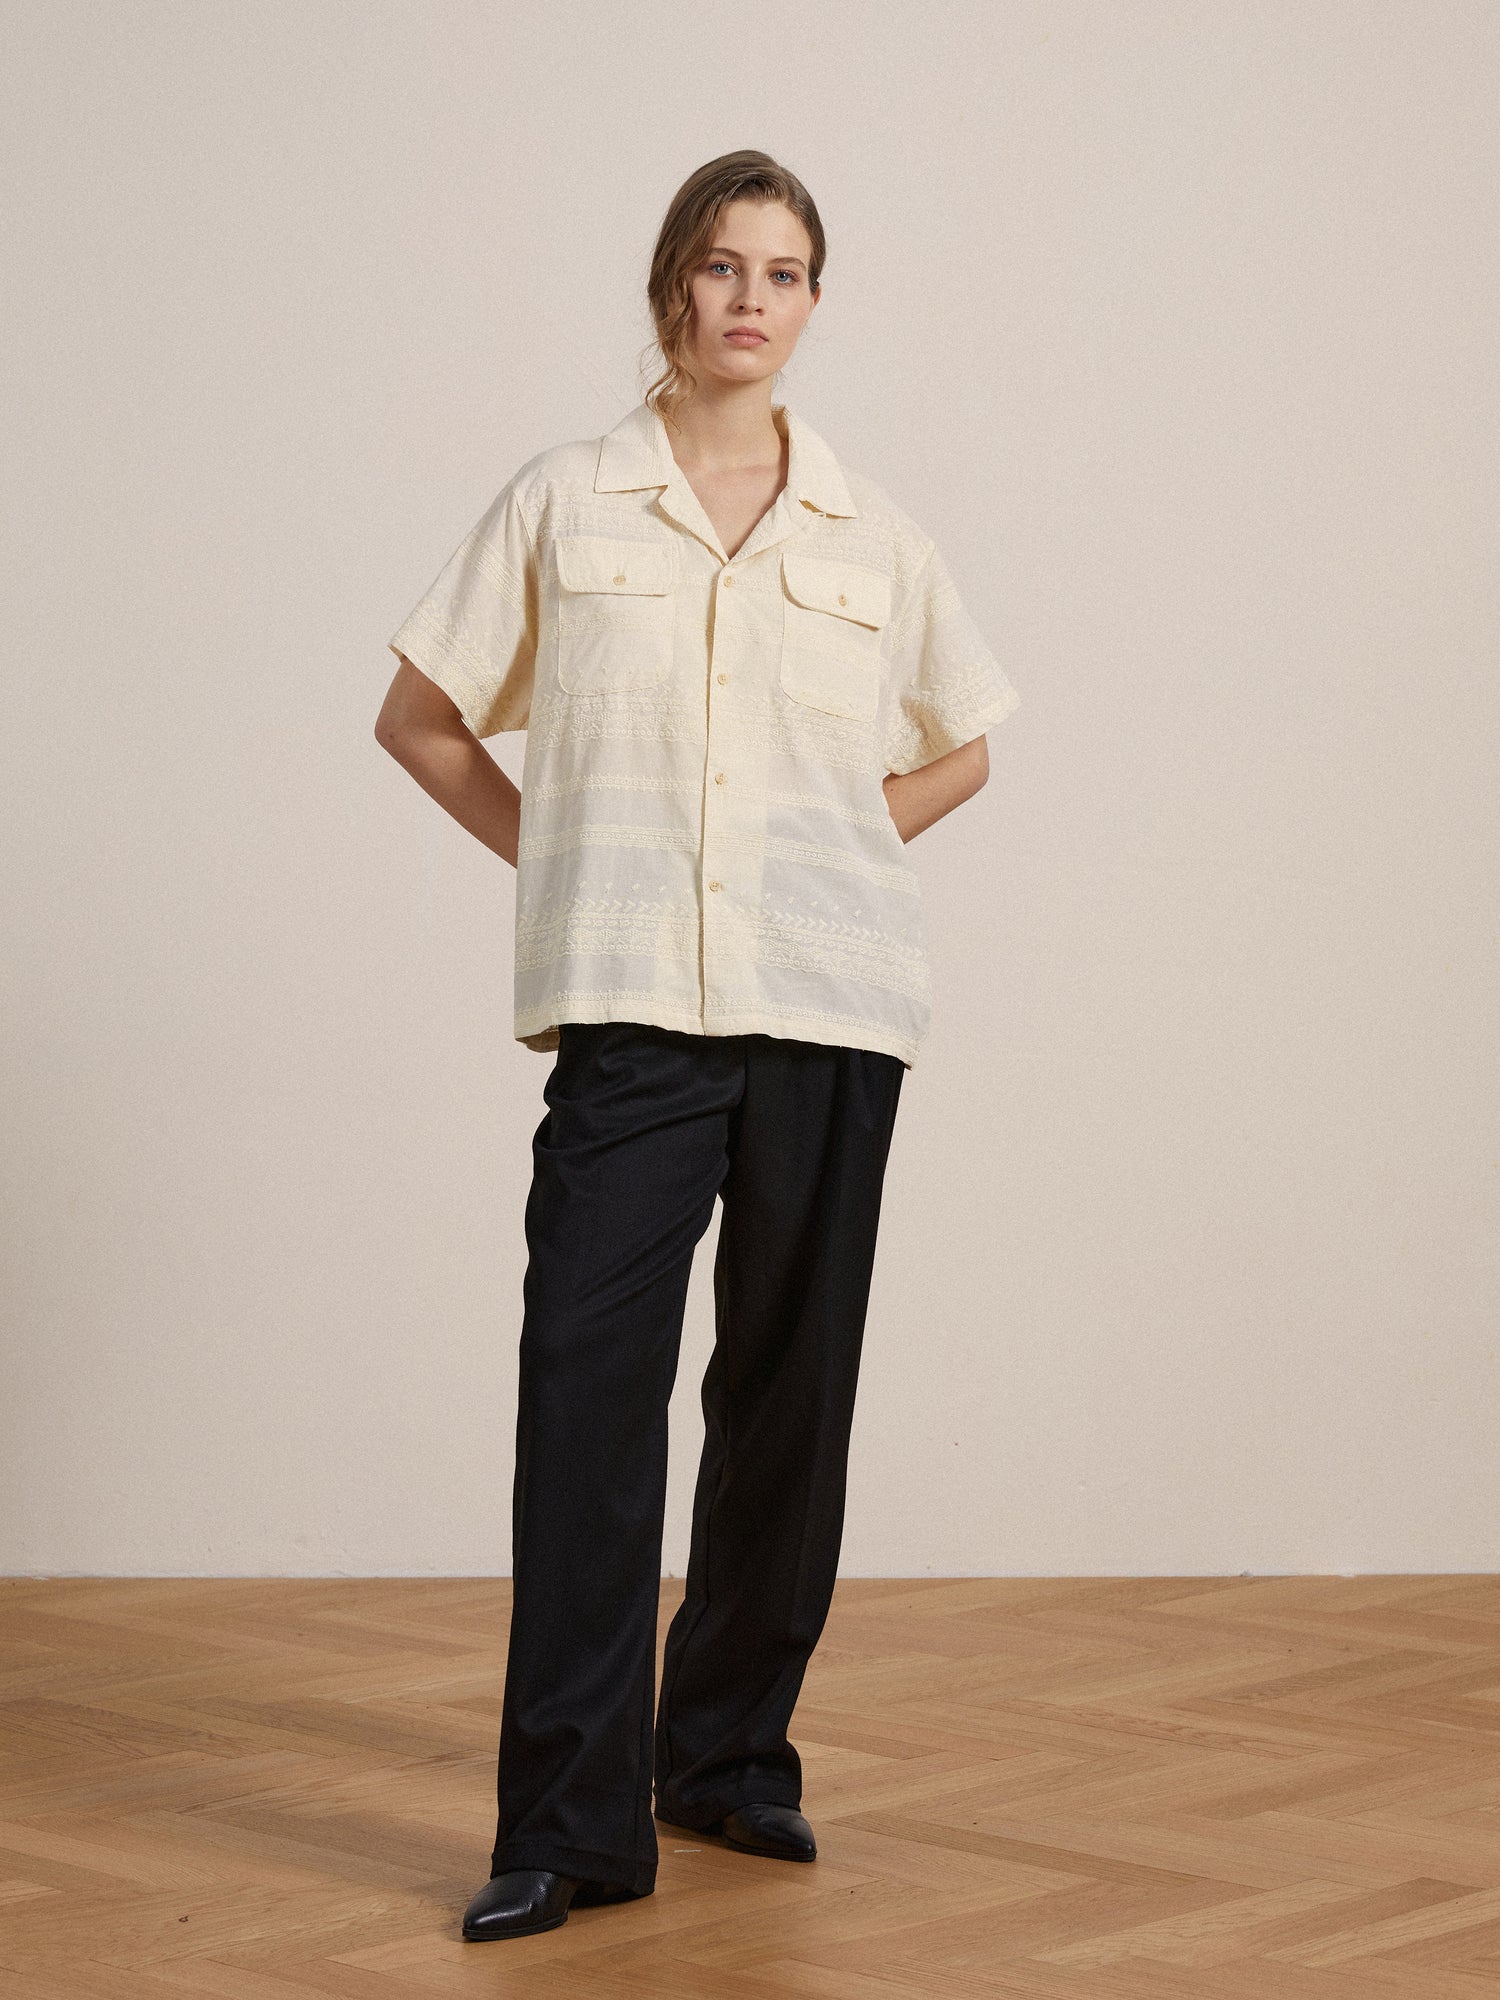 The model is wearing a Found Lace SS Camp Shirt with delicate lace detailing and black pants.